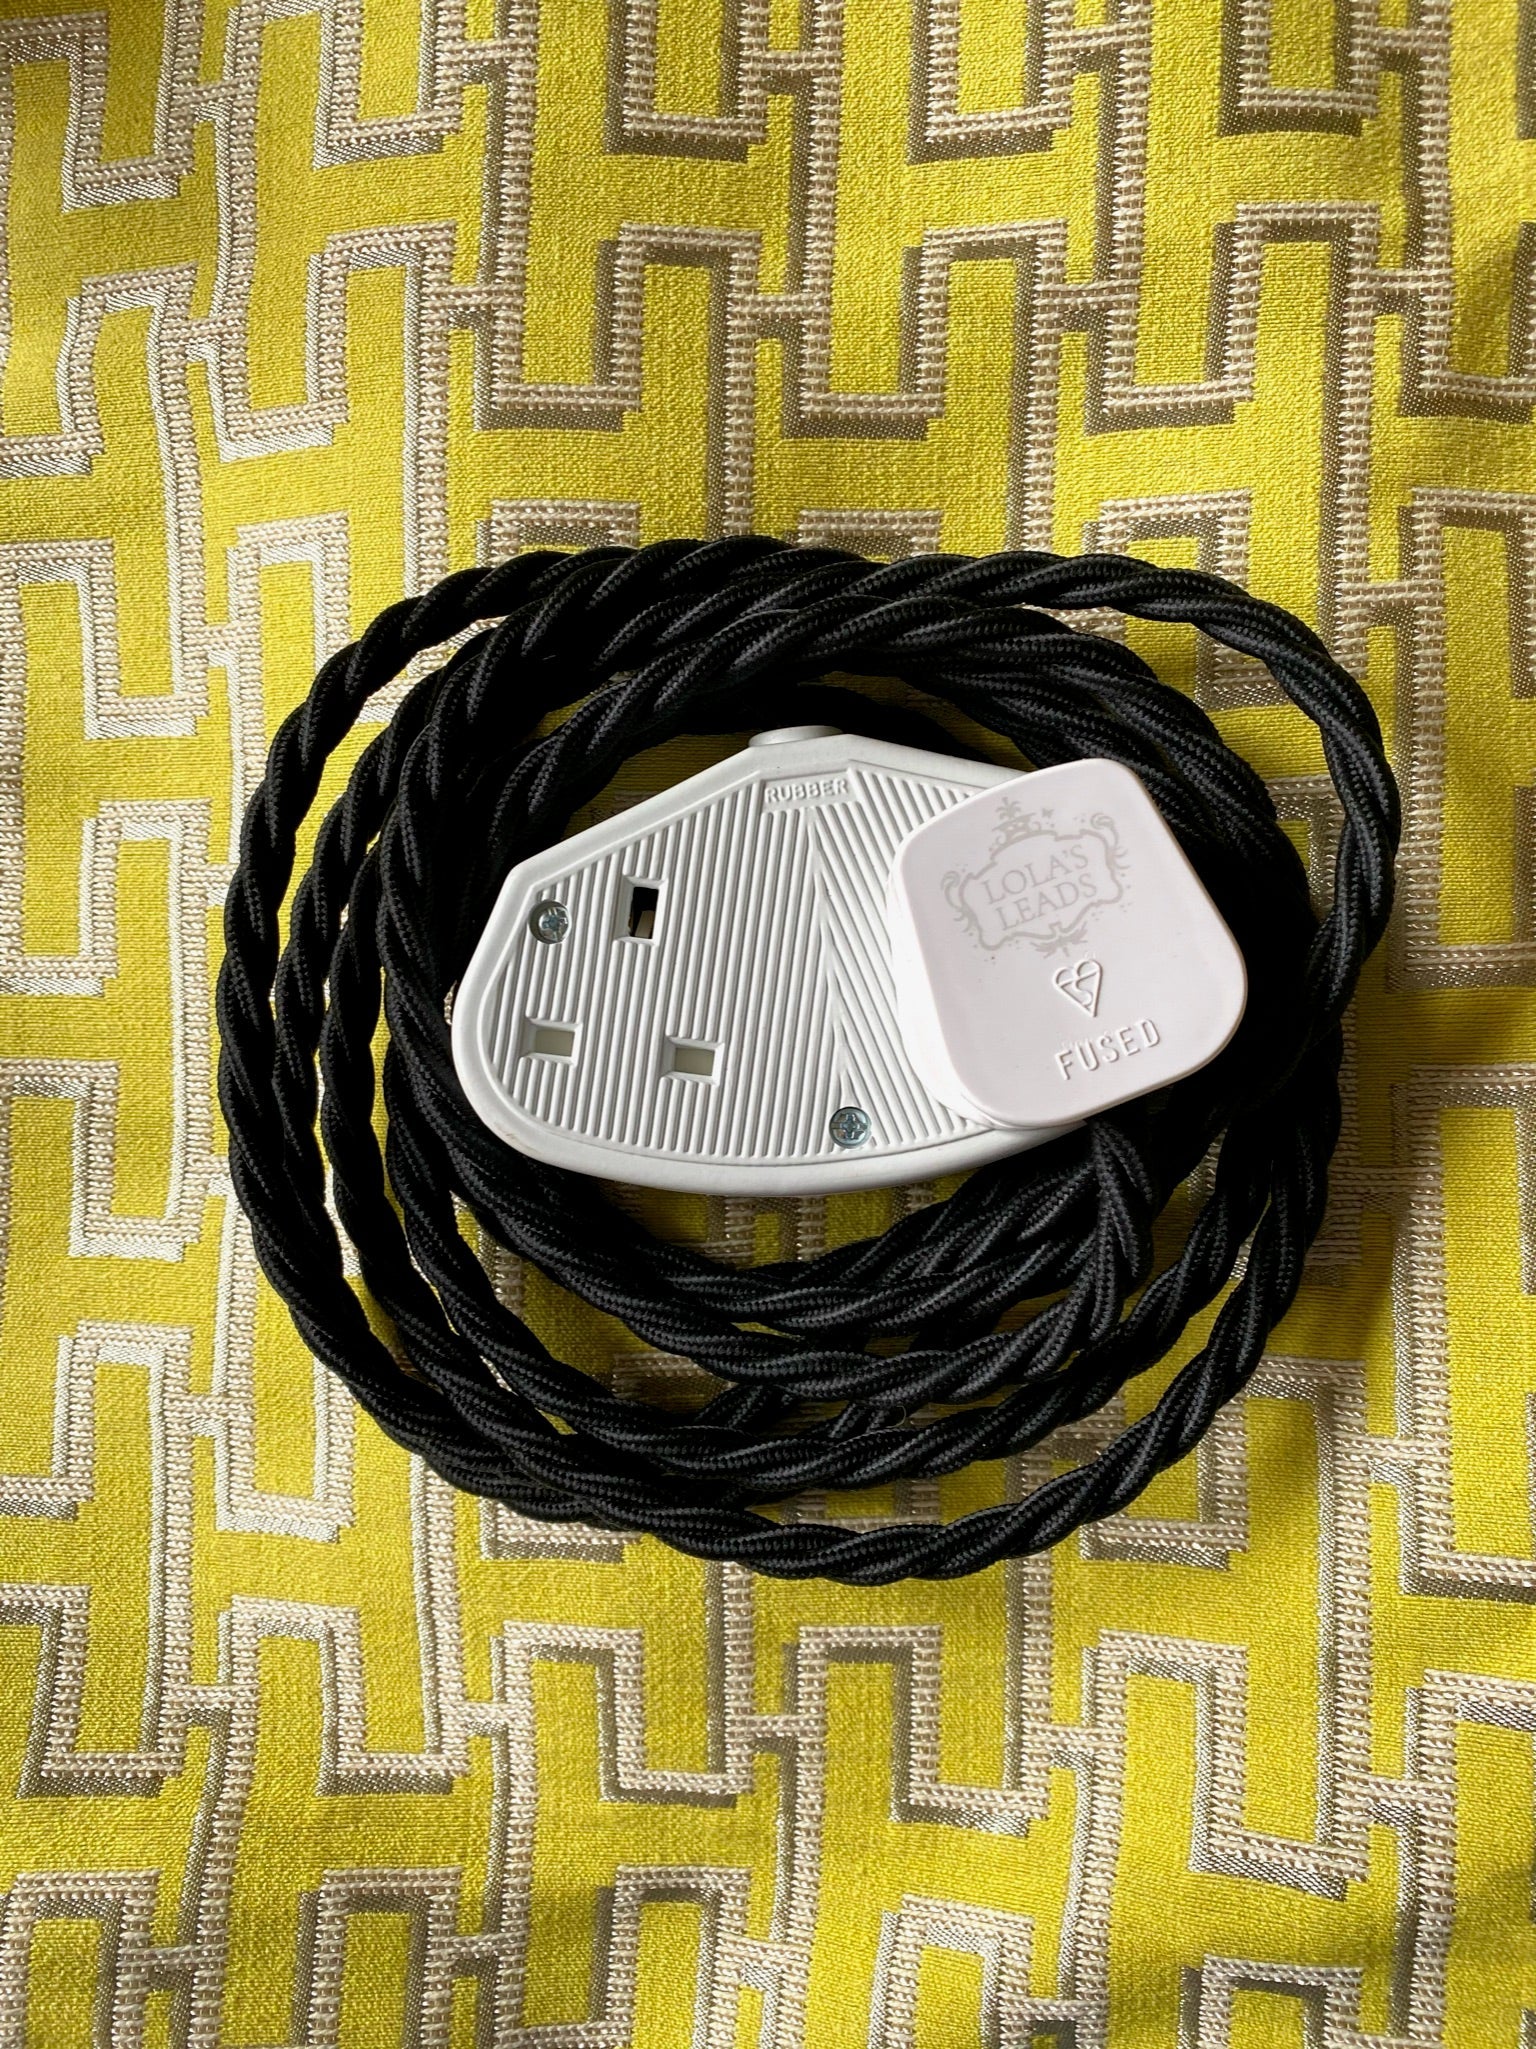 Kohl - Lola's Leads Fabric Extension Cable